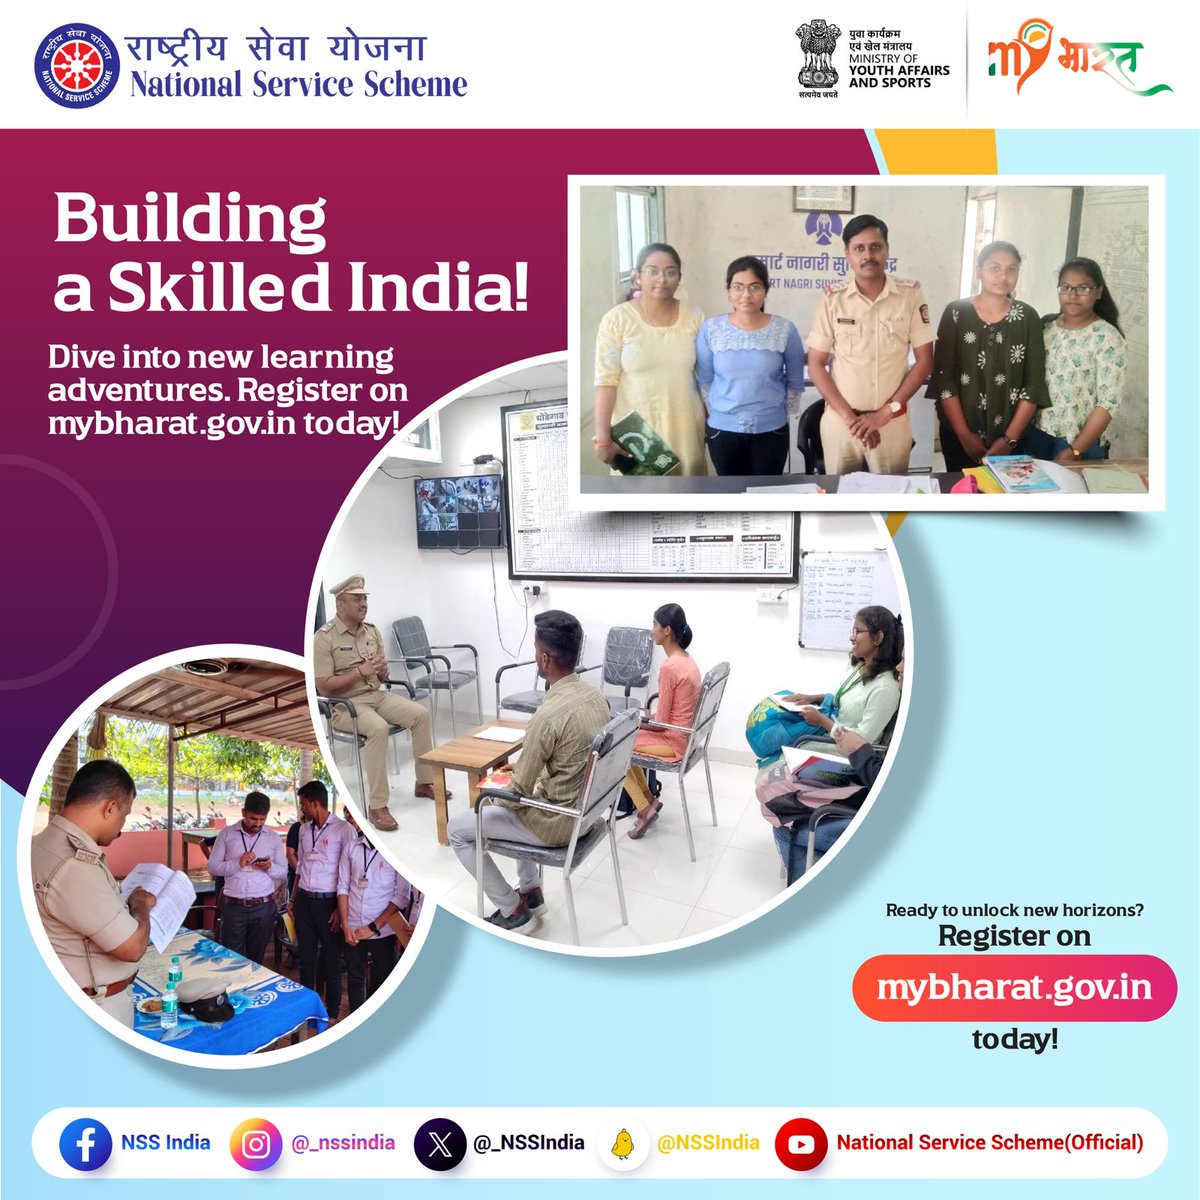 Empowering Communities, Enhancing Skills! Contribute to India's growth story. Register on mybharat.gov.in and start your journey of learning and service today! #mybharat #mybharatregistration